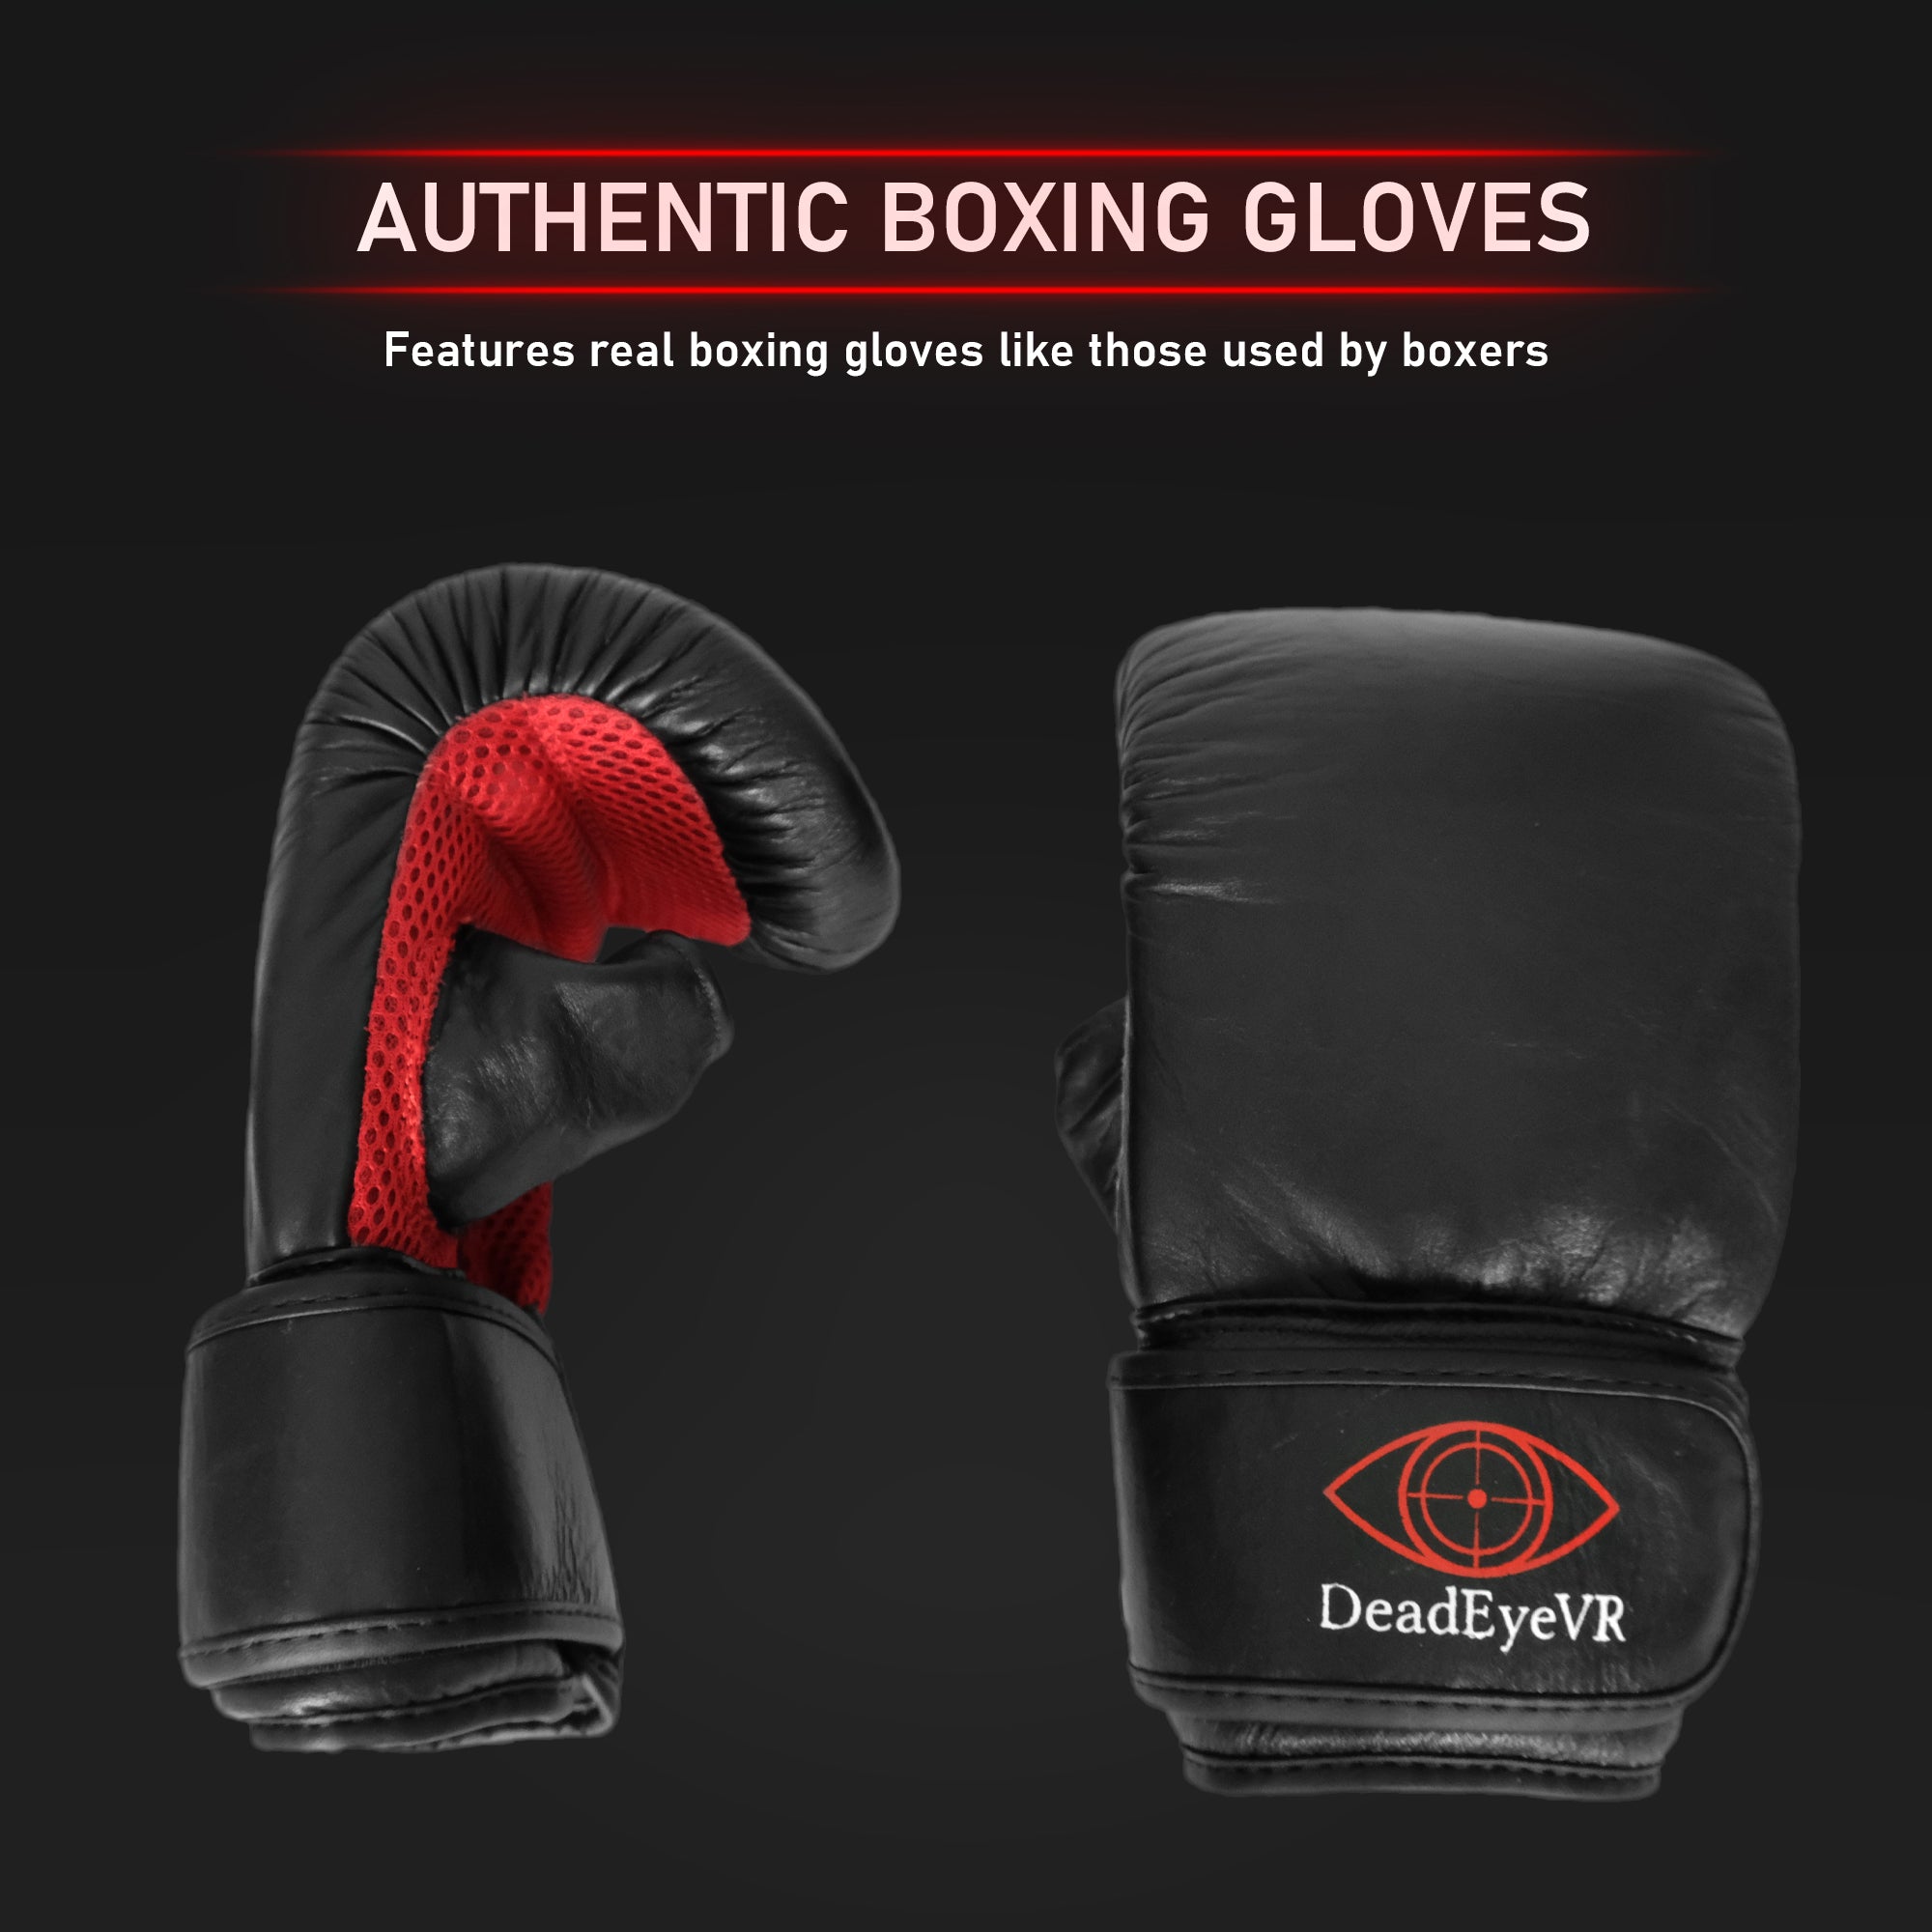 Authentic Boxing Gloves. Features real boxing gloves like those used by boxers